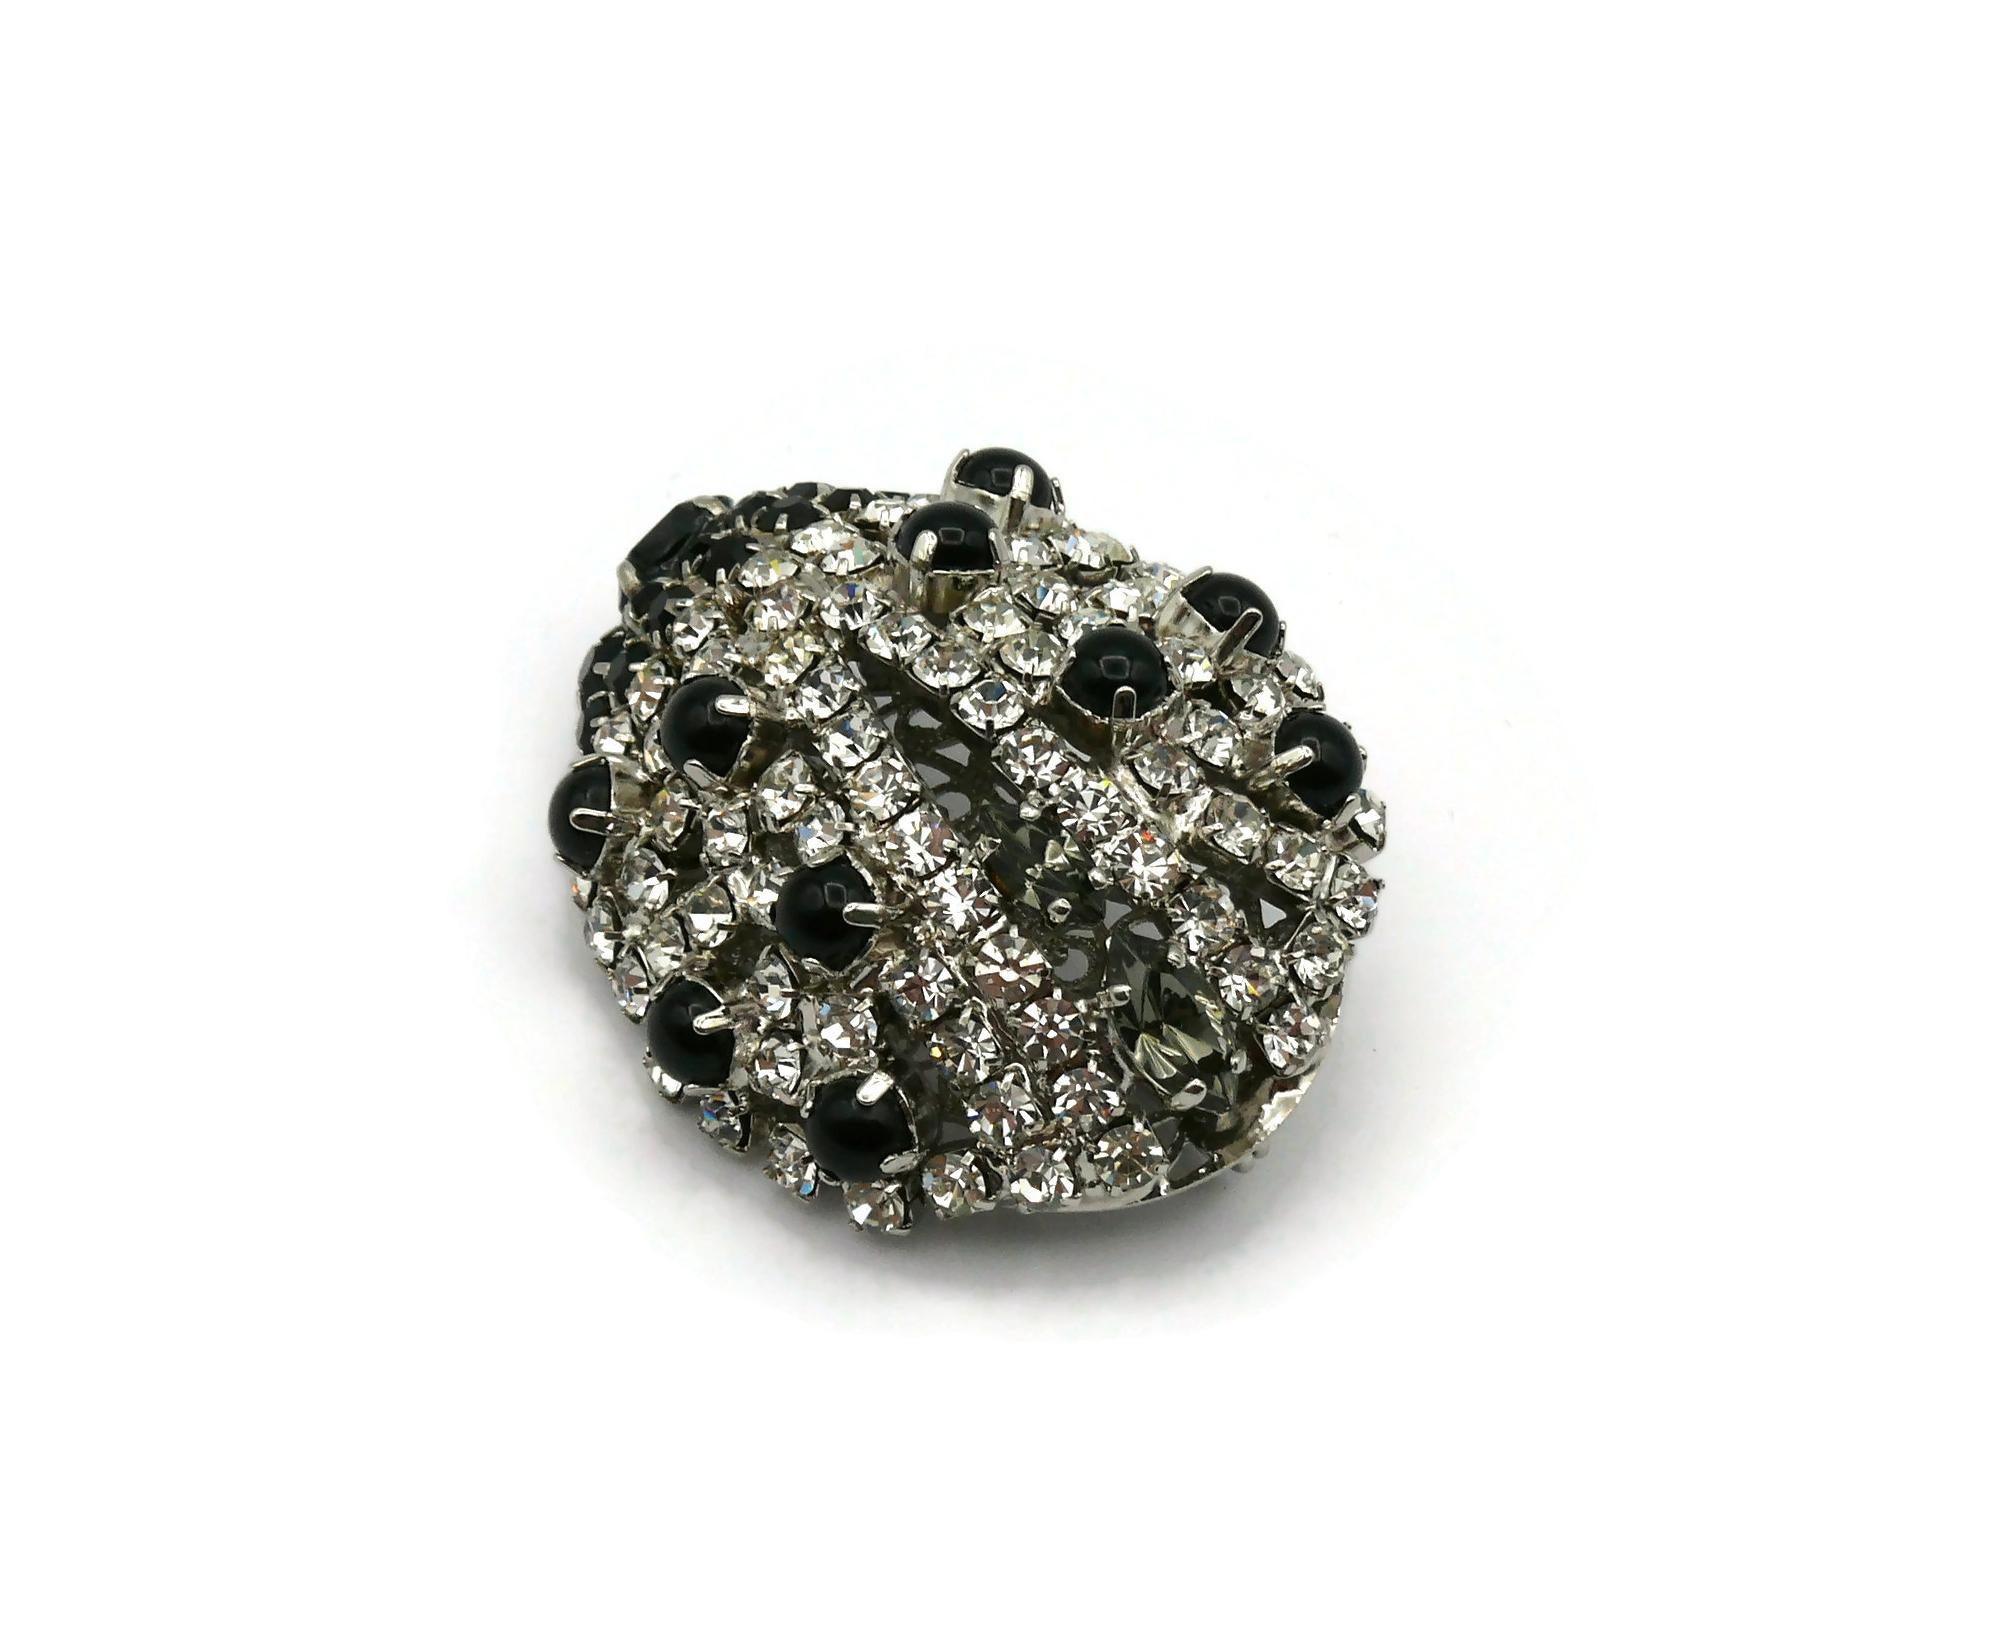 CHRISTIAN LACROIX (Attributed To) Vintage Jewelled Ladybug Brooch For Sale 2